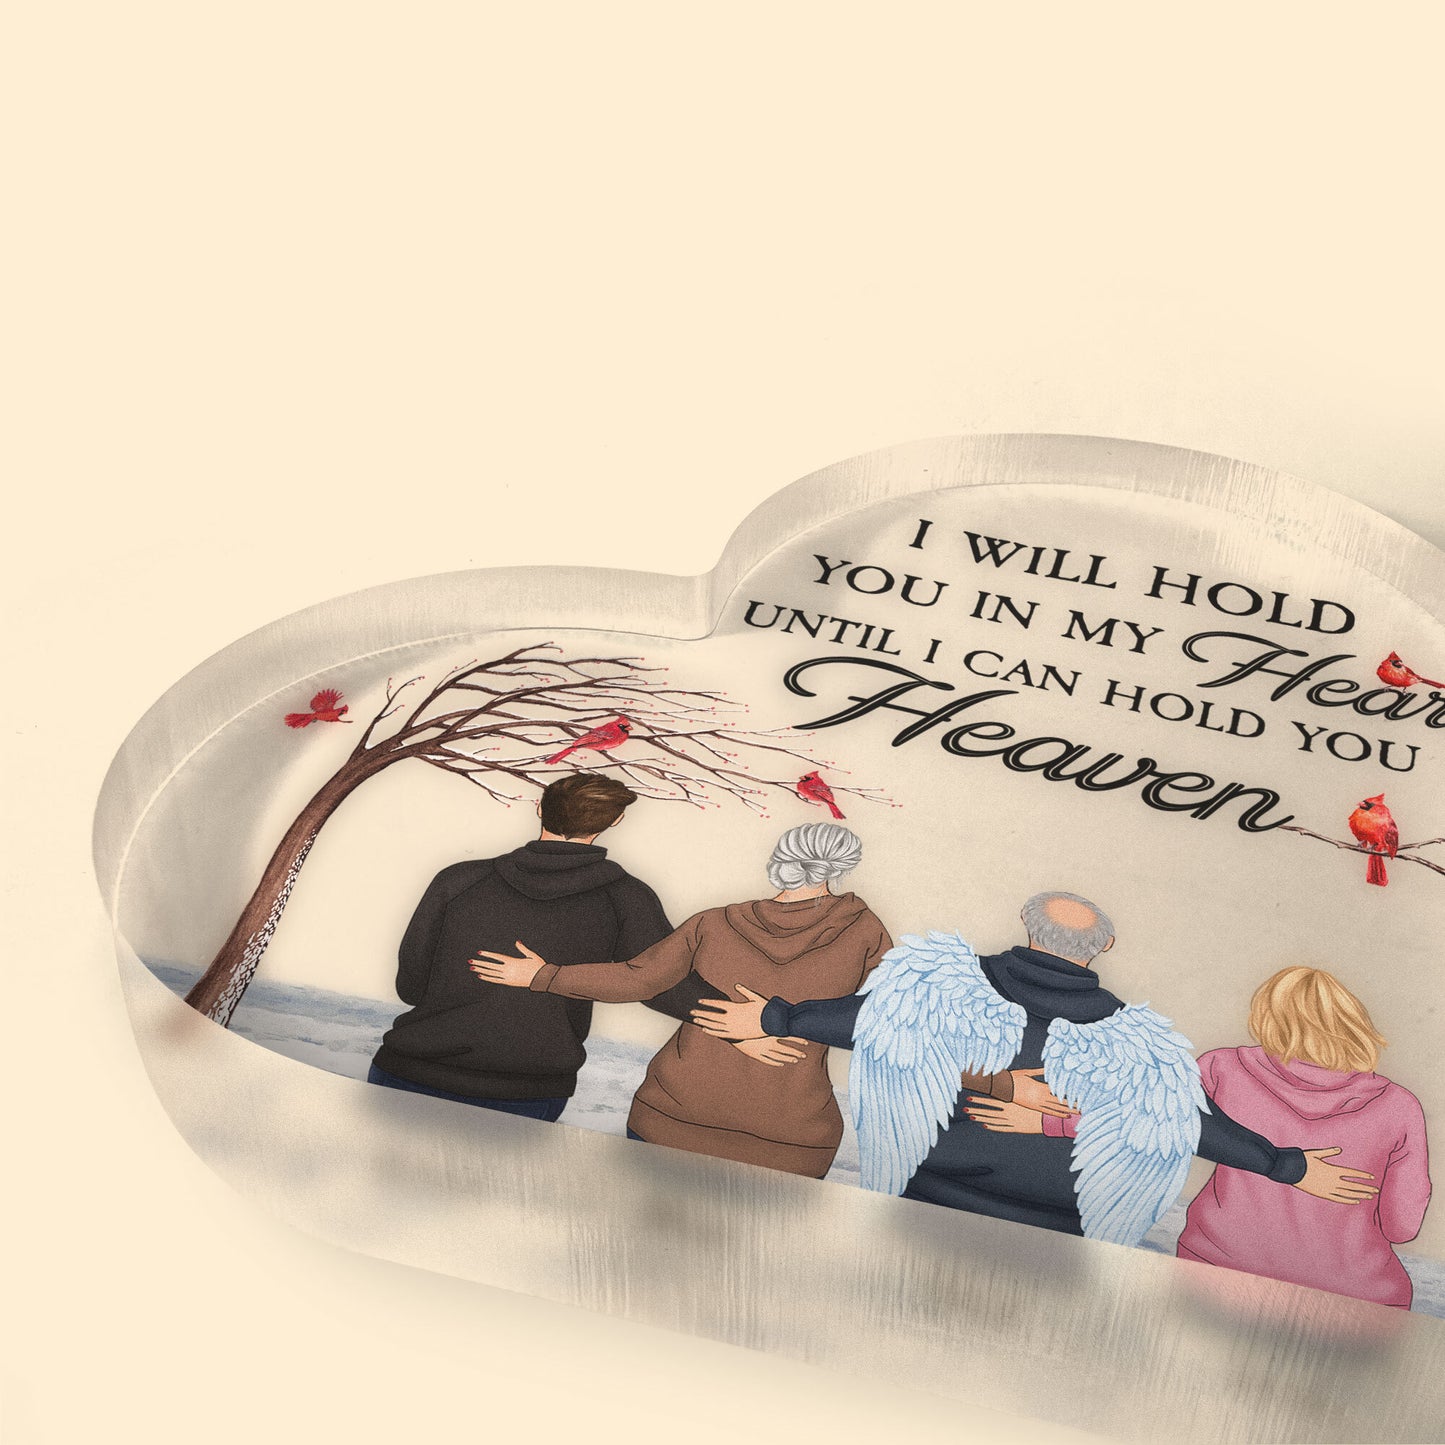 I Will Hold You In My Heart Until I Can Hold You In Heaven - Personalized Heart-Shaped Acrylic Plaque